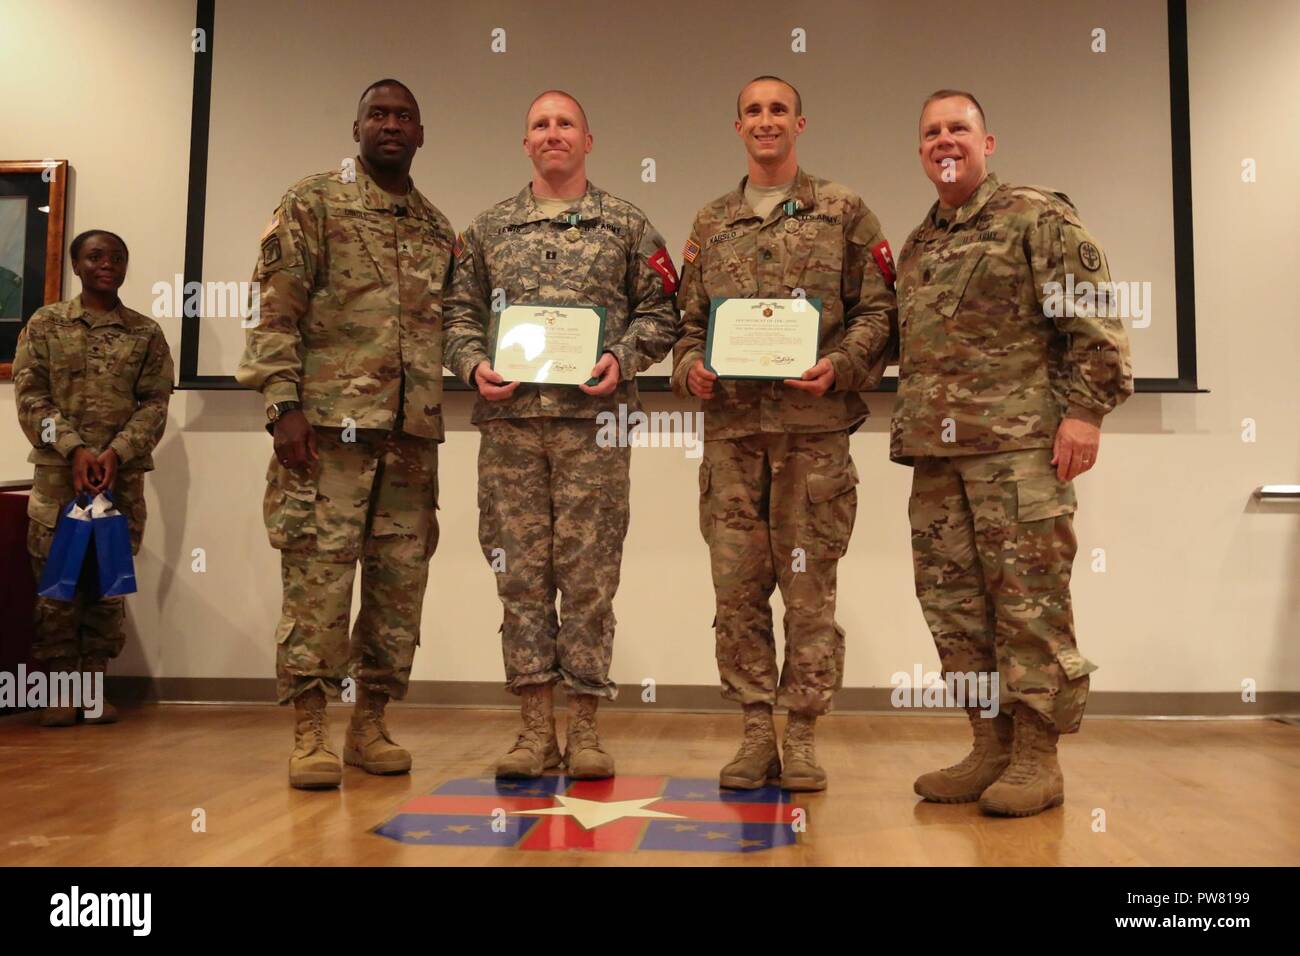 U.S. Army Capt. Jeremy Lewis and Staff Sgt. Joseph Karslo, assigned Public Health Command - Atlantic, take a photo with Brig. Gen. R. Scott Dingle and Command Sgt. Maj. Matthew Brady during the 2017 Best Medic Competition Award Ceremony at Fort Bragg, N.C., Sept. 20, 2017. The competition tested the physical and mental toughness, as well as the technical competence, of each medic to identify the team moving forward to represent the region at the next level of the competition. Stock Photo